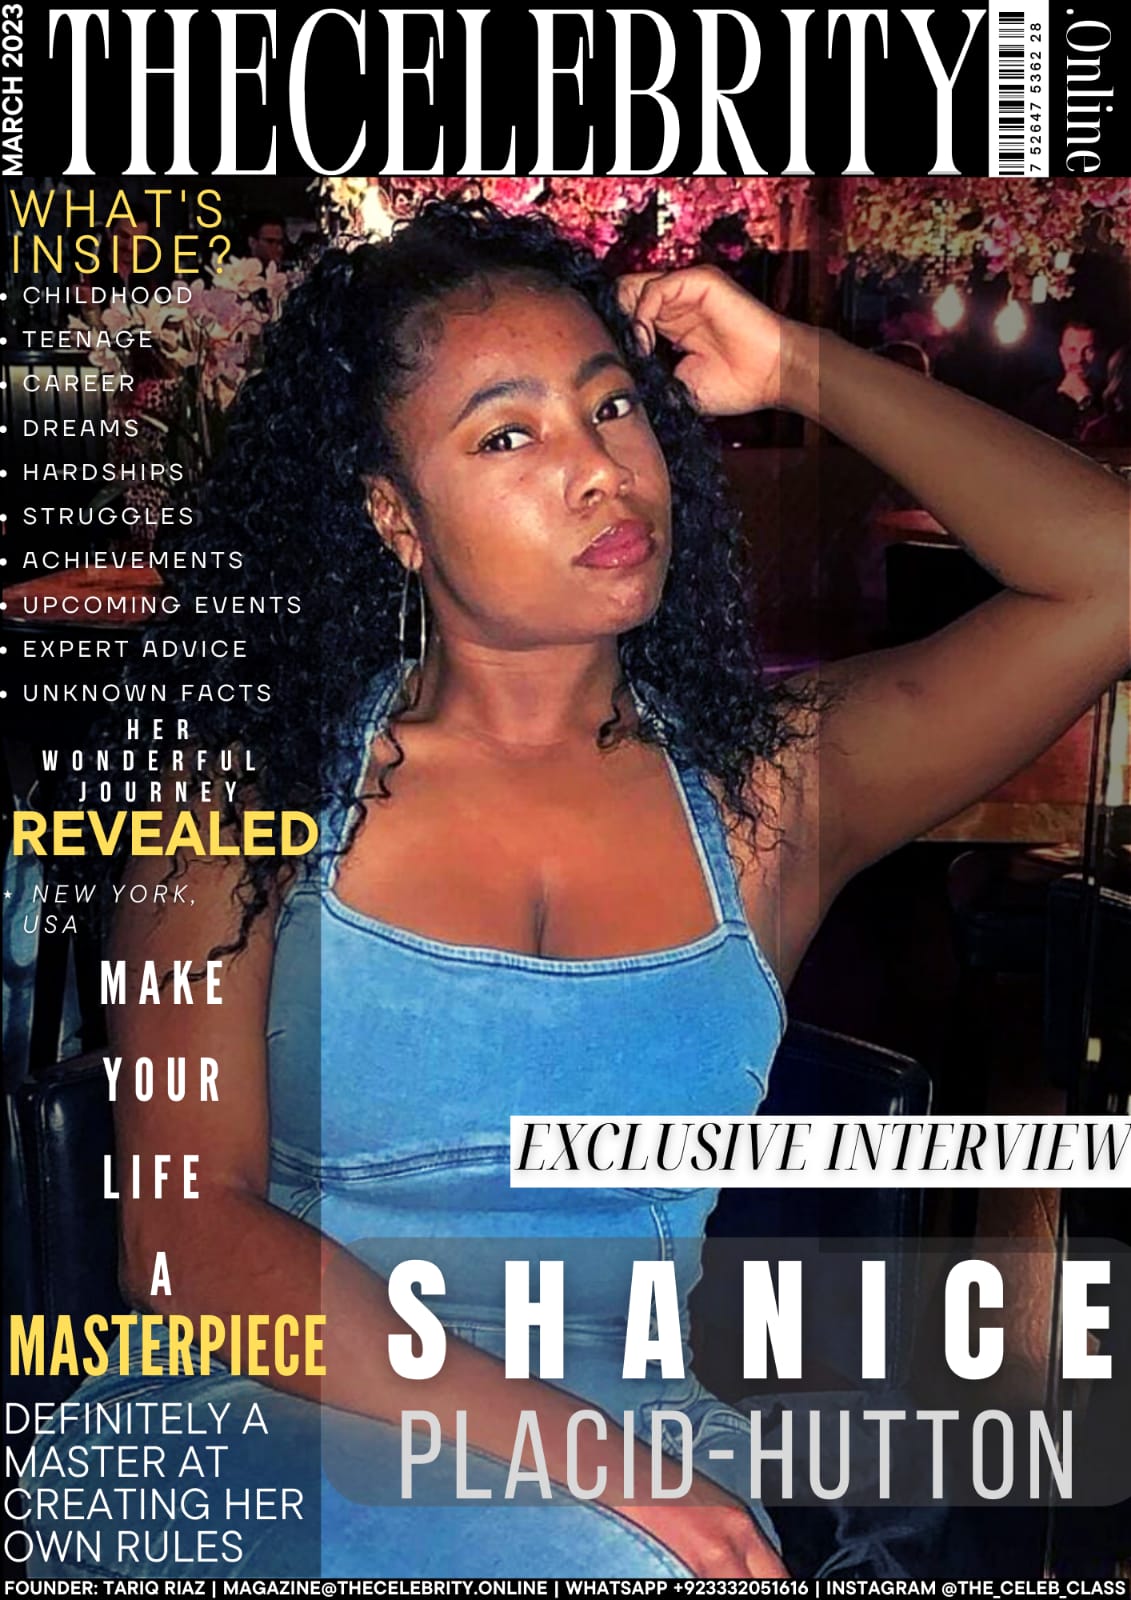 Shanice Placid-Hutton Exclusive Interview – ‘Keep Going And Focus On Yourself’